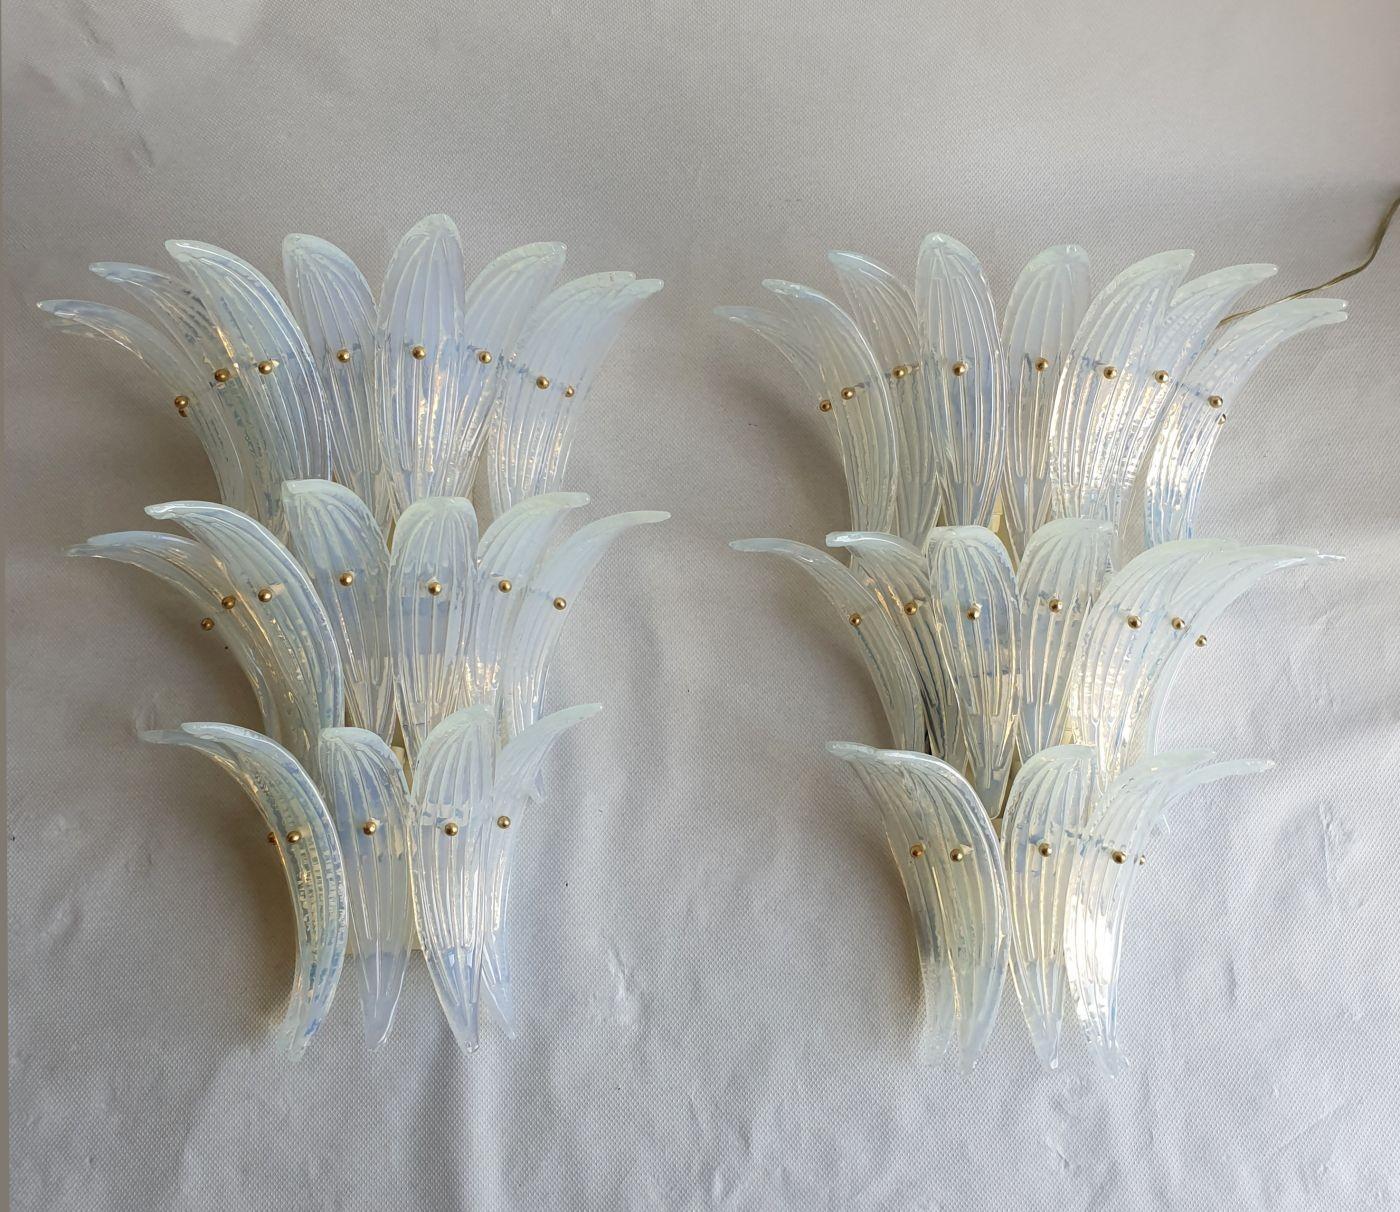 Pair of large Mid-Century Opaline Murano glass Palmette sconces, Barovier and Toso style, Italy 1970s.
The large three tiered sconces are made of 21 Palmette of handmade Murano glass each.
The back plate is painted white.
Each sconce has 5 lights,